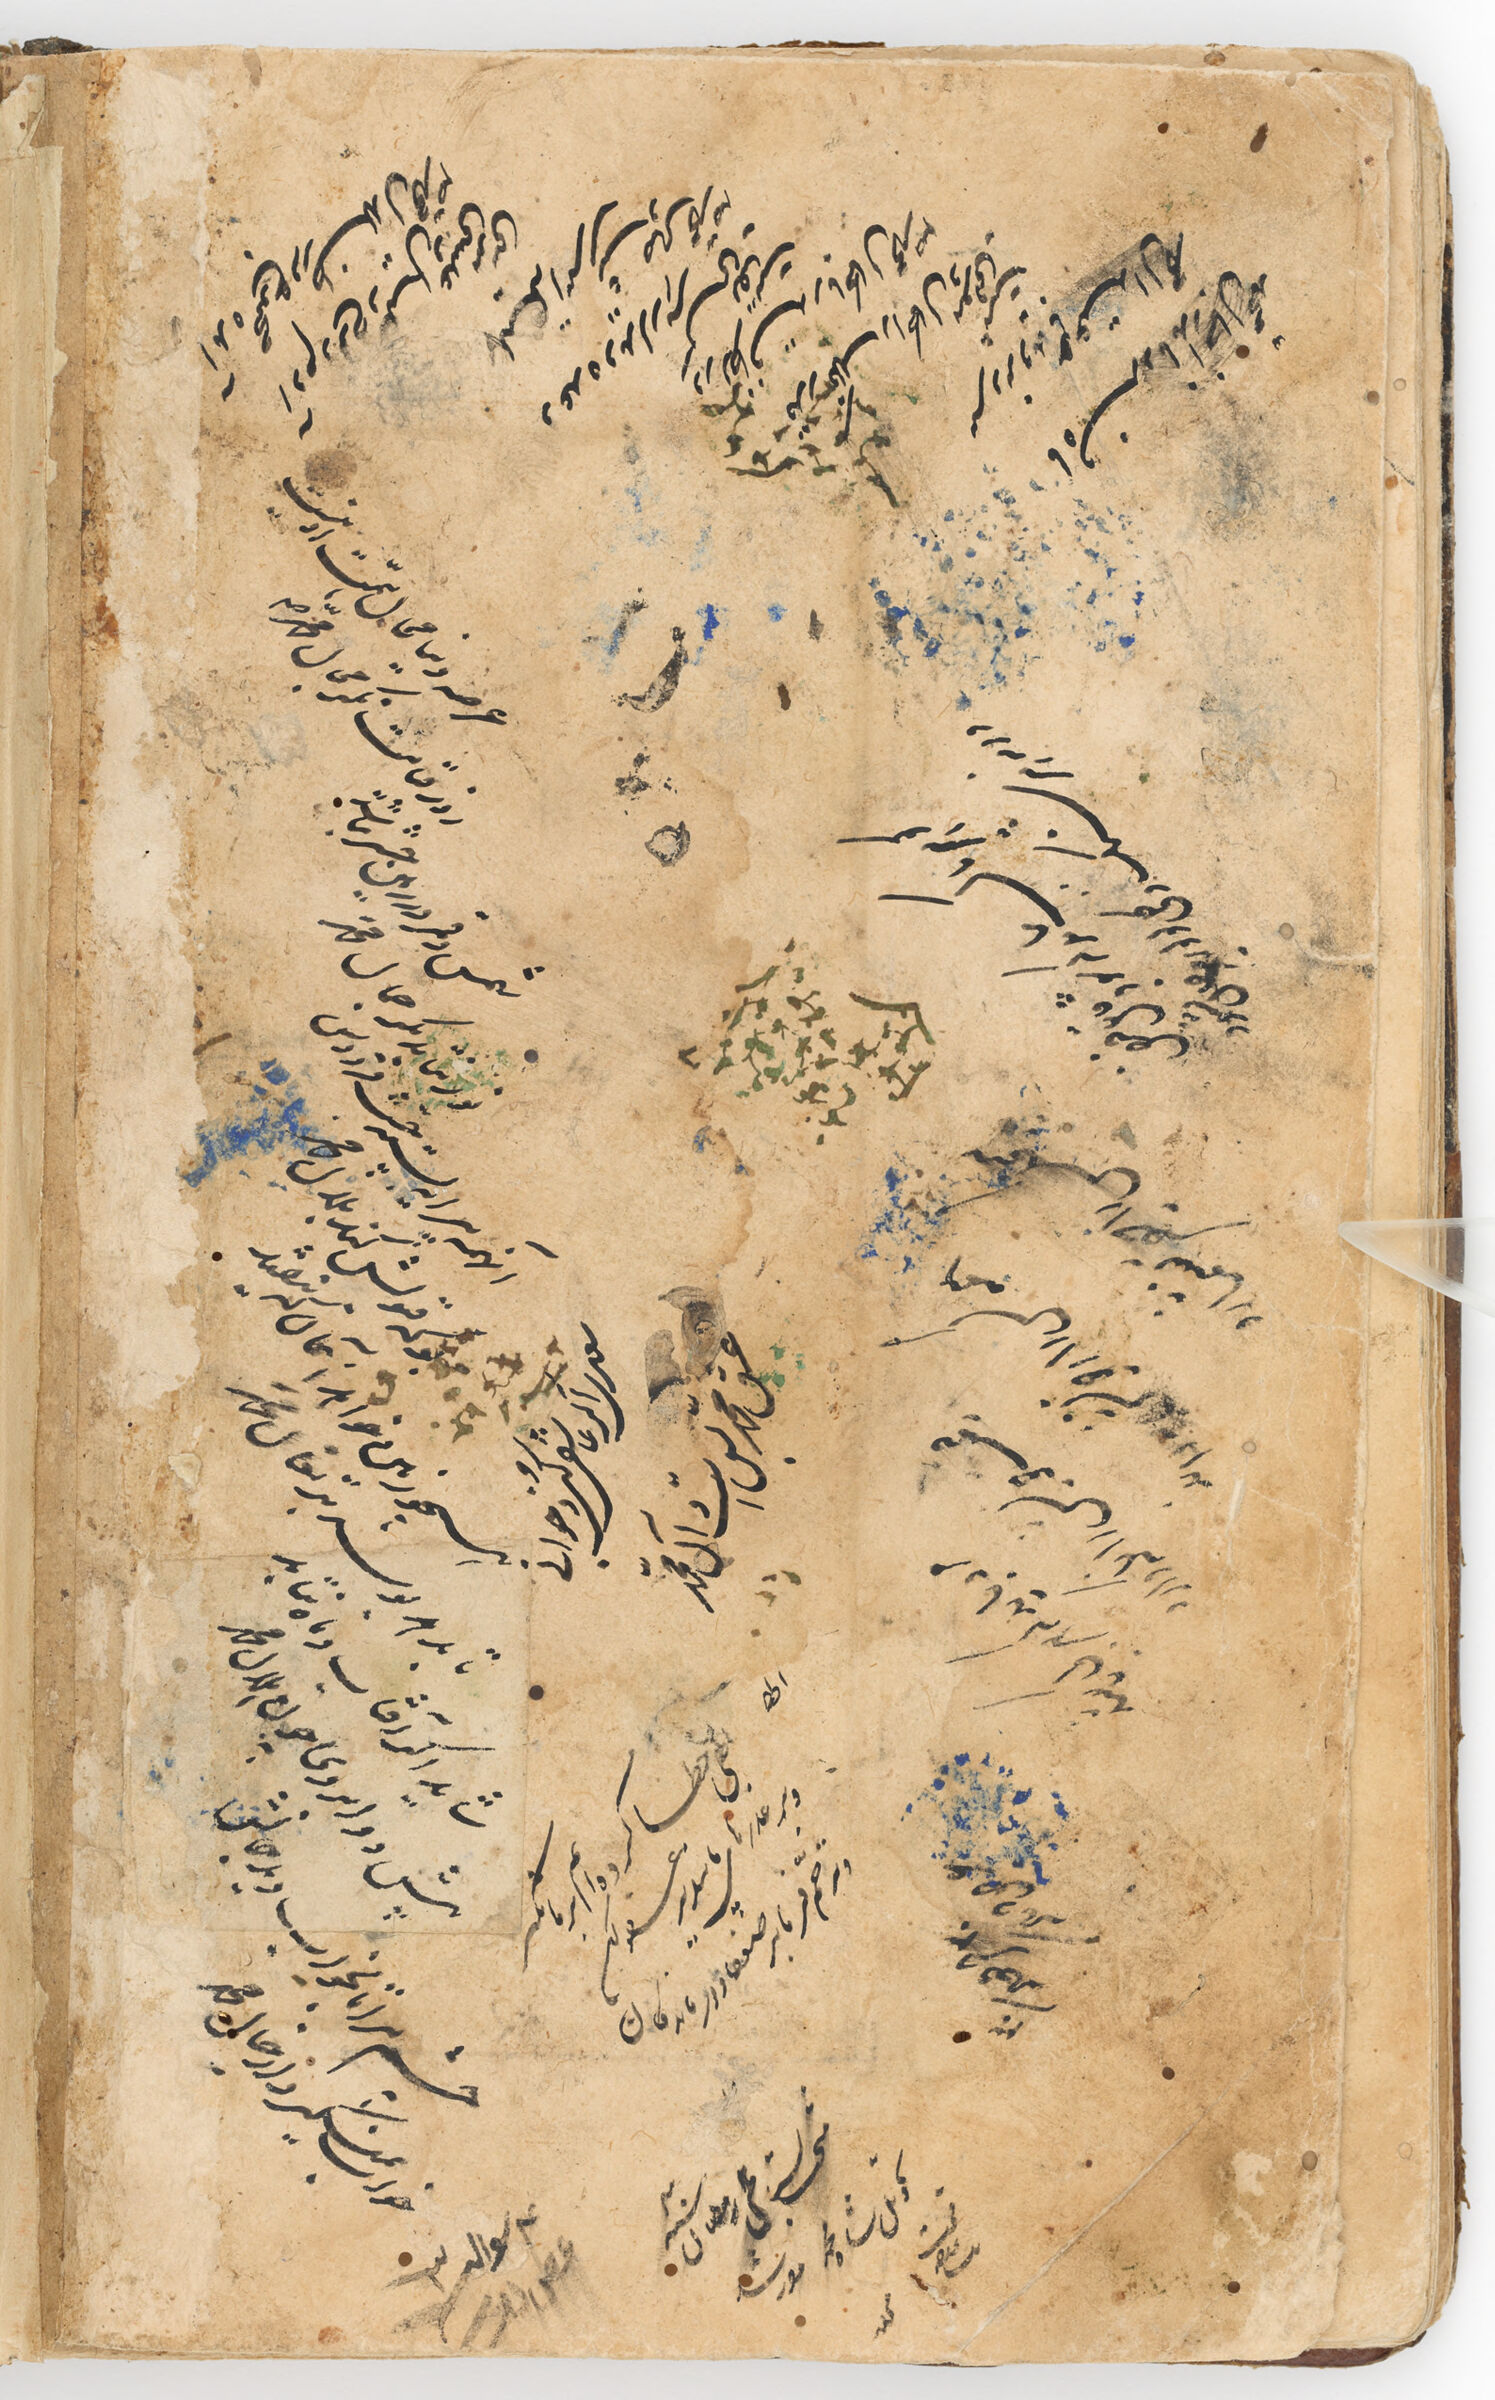 Inspection Notes And Poems In Later Hands (Text Recto; Later Notes Verso Of Folio 24), From A Manuscript Of The Muntakhab-I Bustan By Sa`di